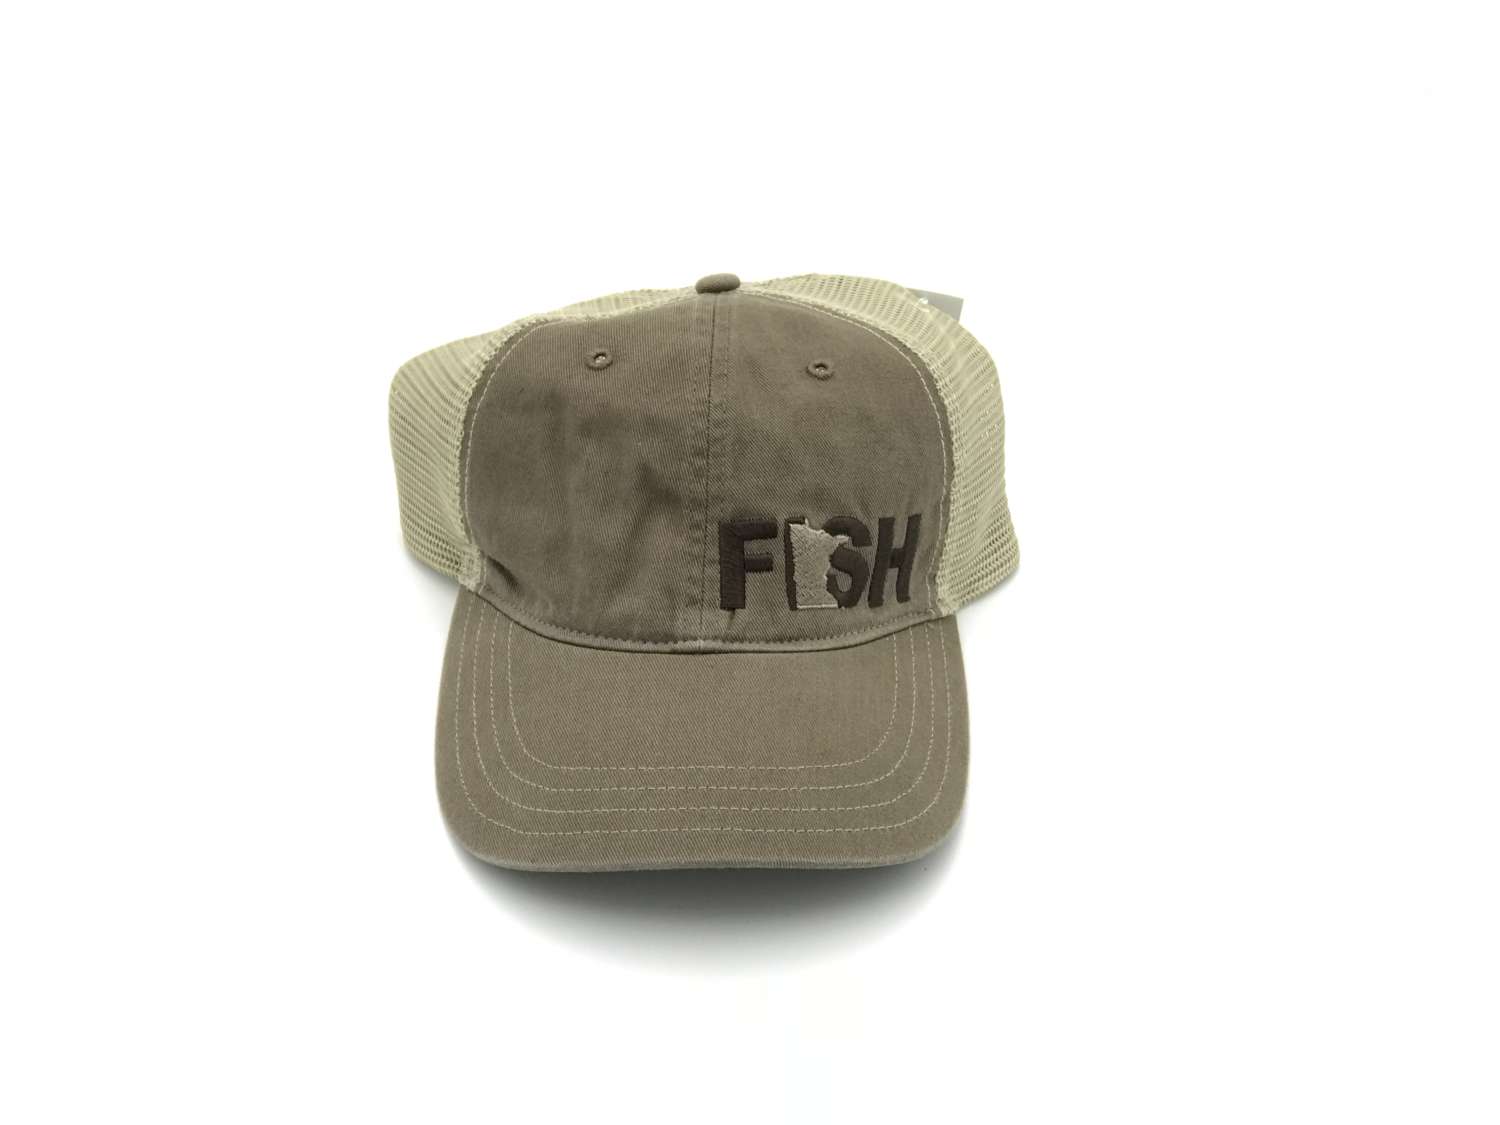 Fish Minnesota Night Out Embroidered Unstructured Snapback Dad Hat Khaki